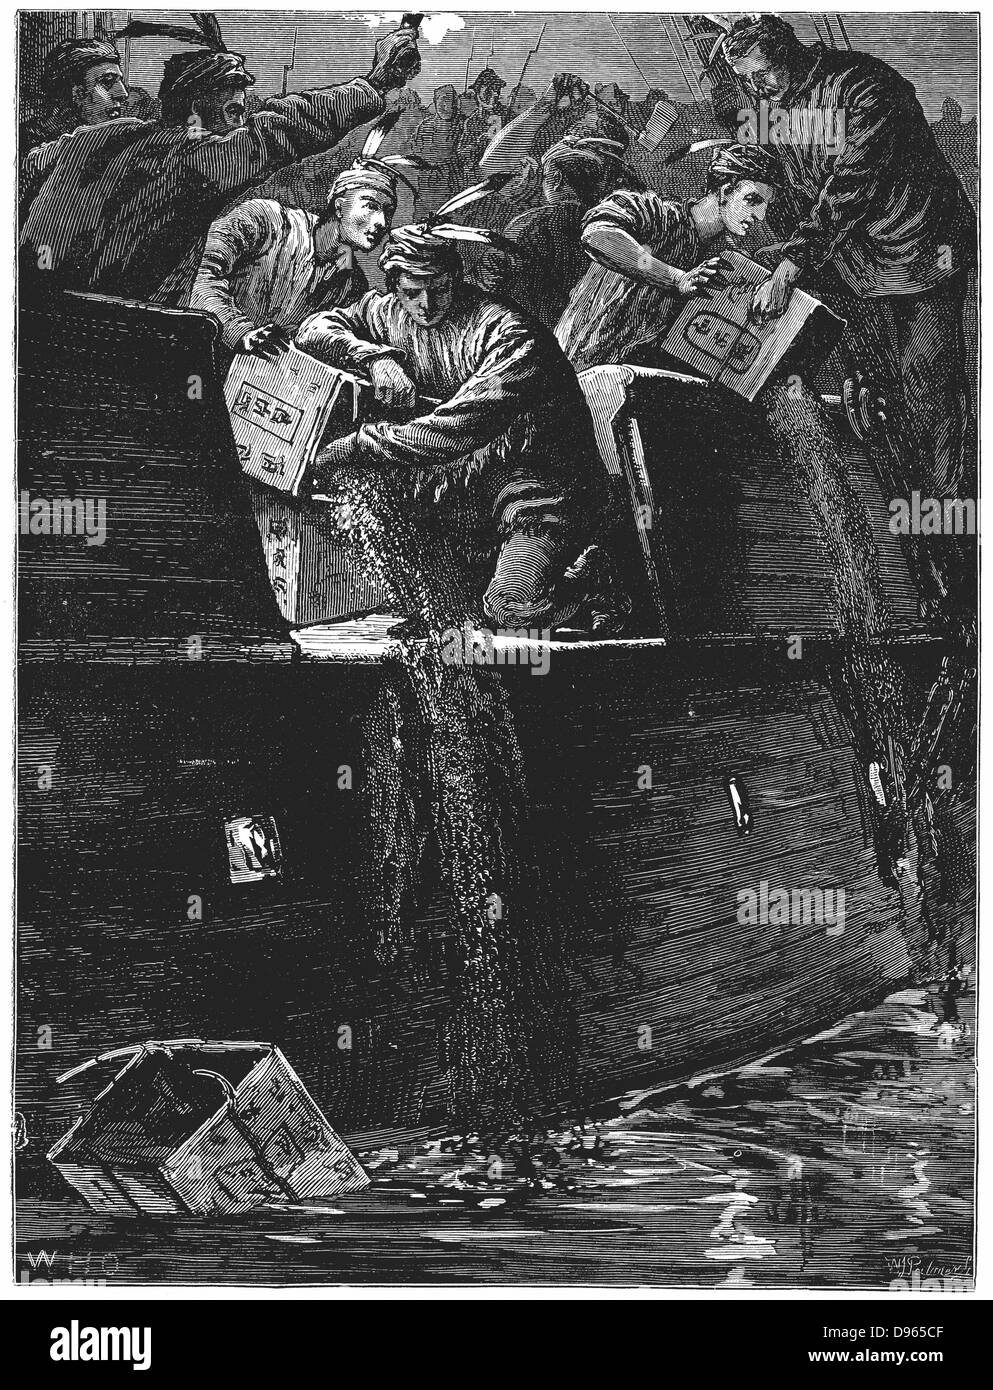 Boston Tea Party, 26 December 1773. Inhabitants of Boston, Massachusetts, dressed as American Indians,  throwing tea from vessels in the harbour into the water as a protest against British taxation. 'No taxation without representation'. Wood engraving, late 19th century. Stock Photo